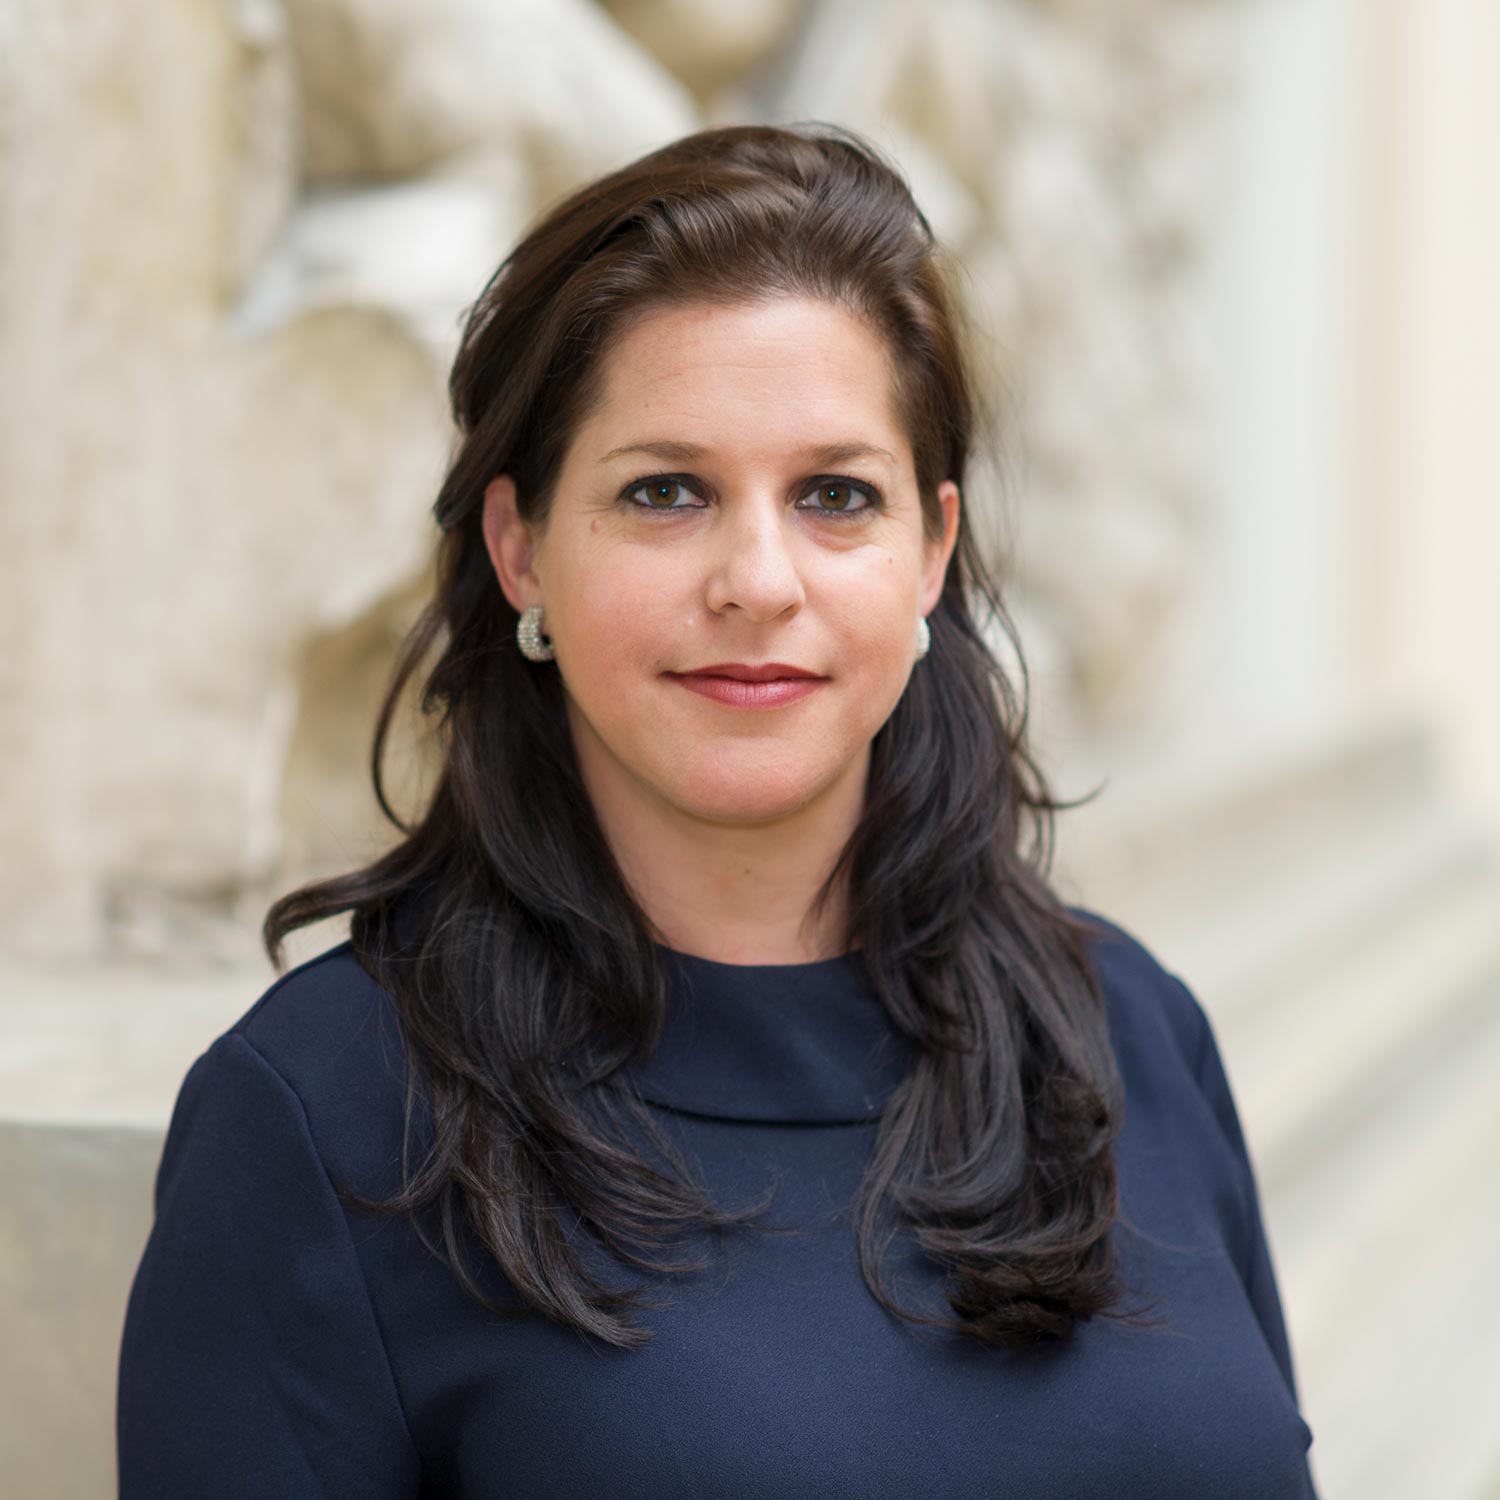 Dina Pomeranz is UBS Foundation Assistant Professor of Applied Economics at the University of Zurich